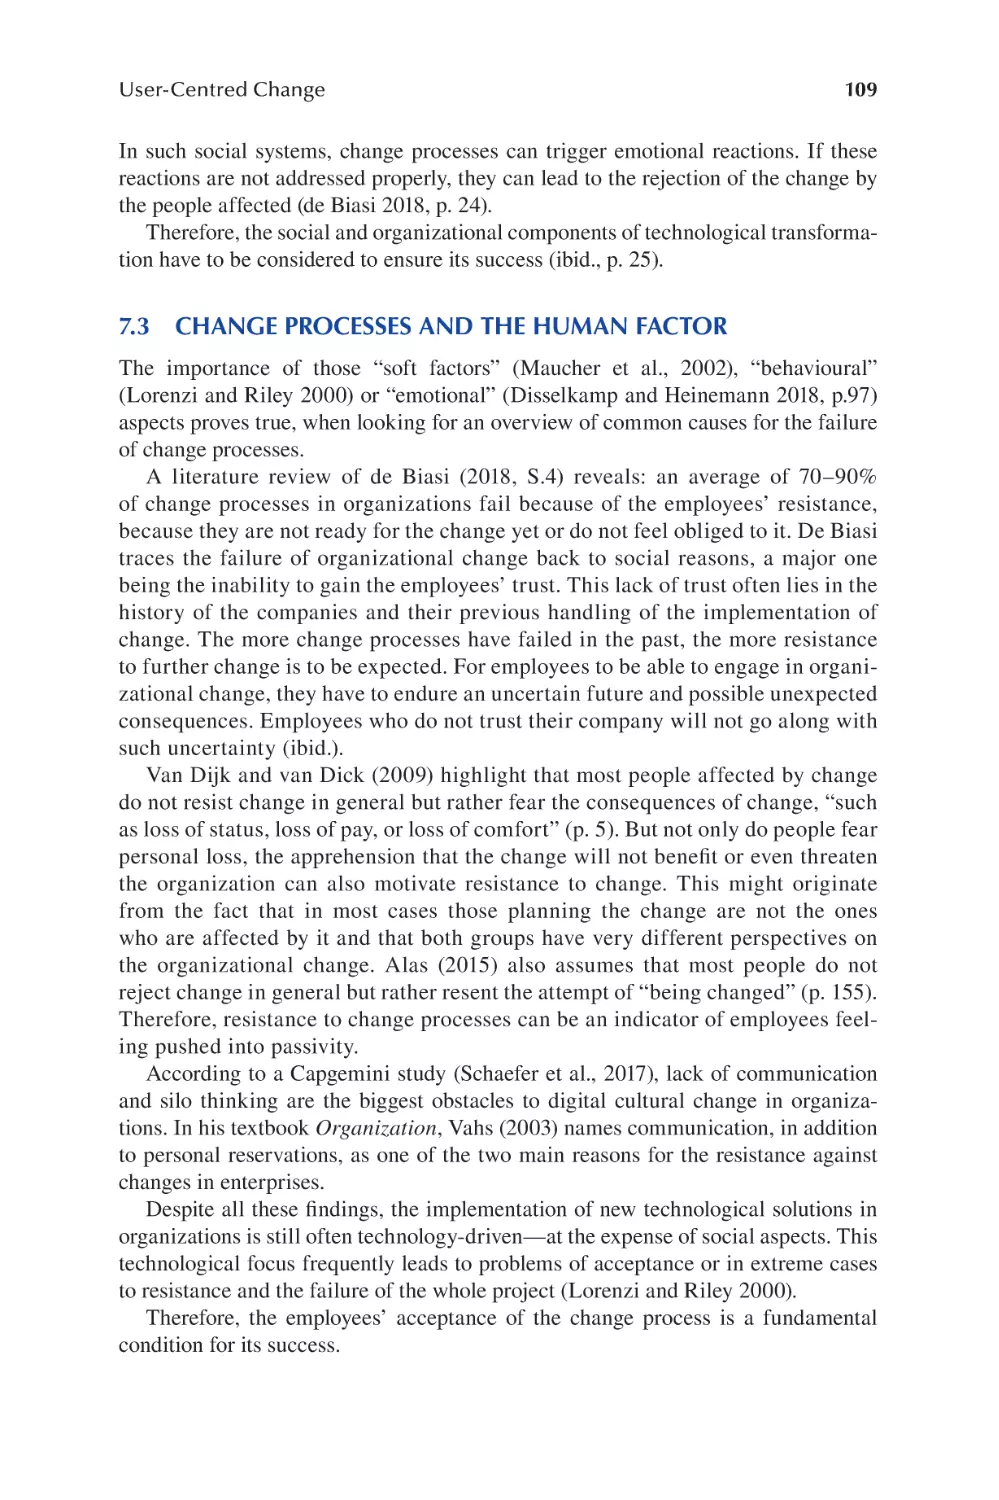 7.3 Change Processes and the Human Factor